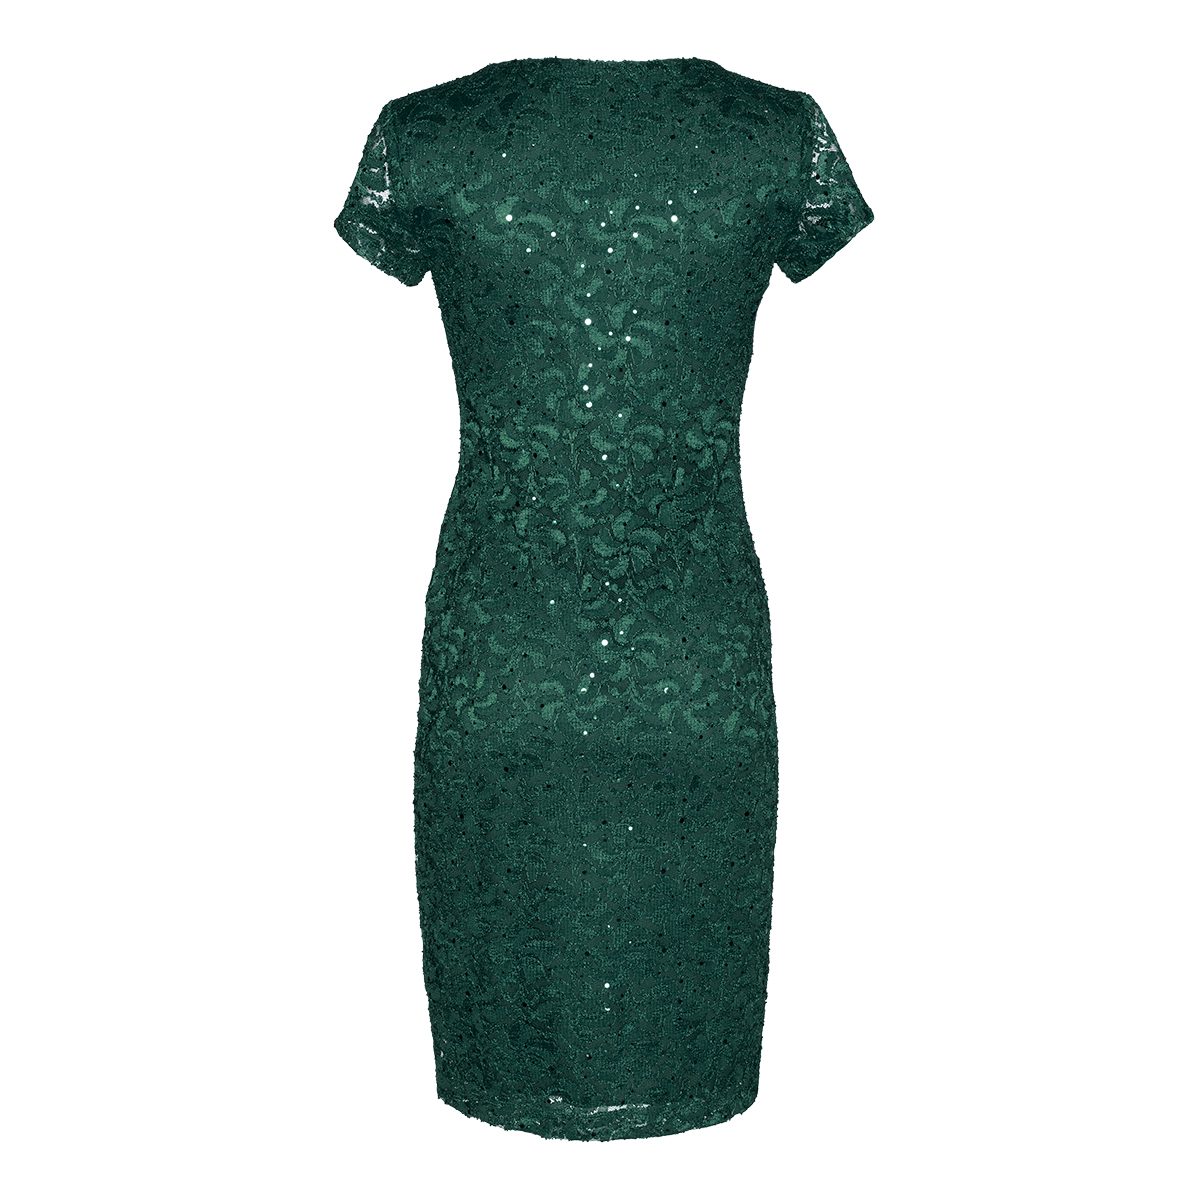 Petite Connected Apparel Short Sleeve Sequin Lace Dress